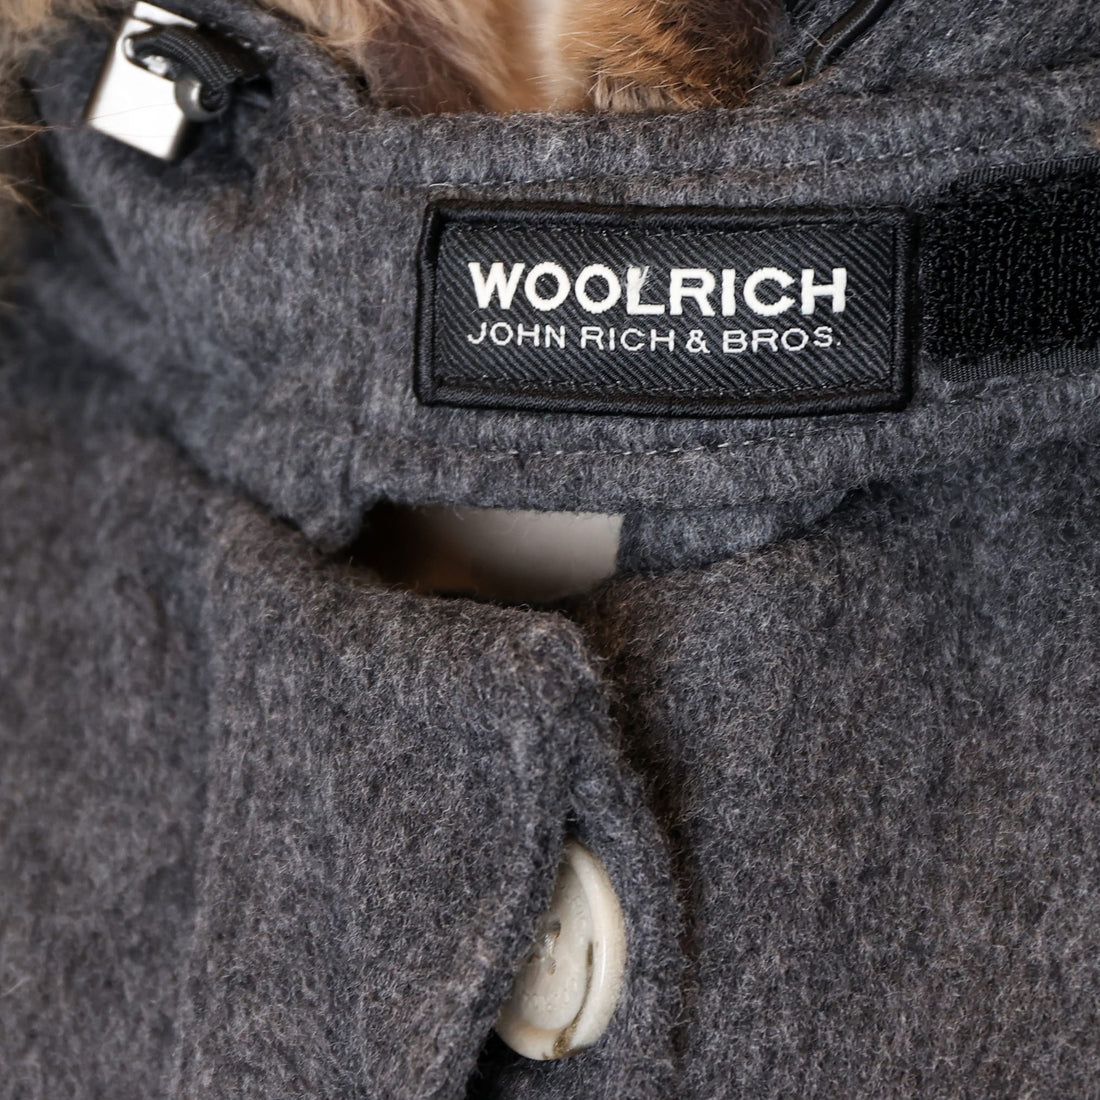 Woolrich down parka "Special Lodenfrey Edition" made of loden